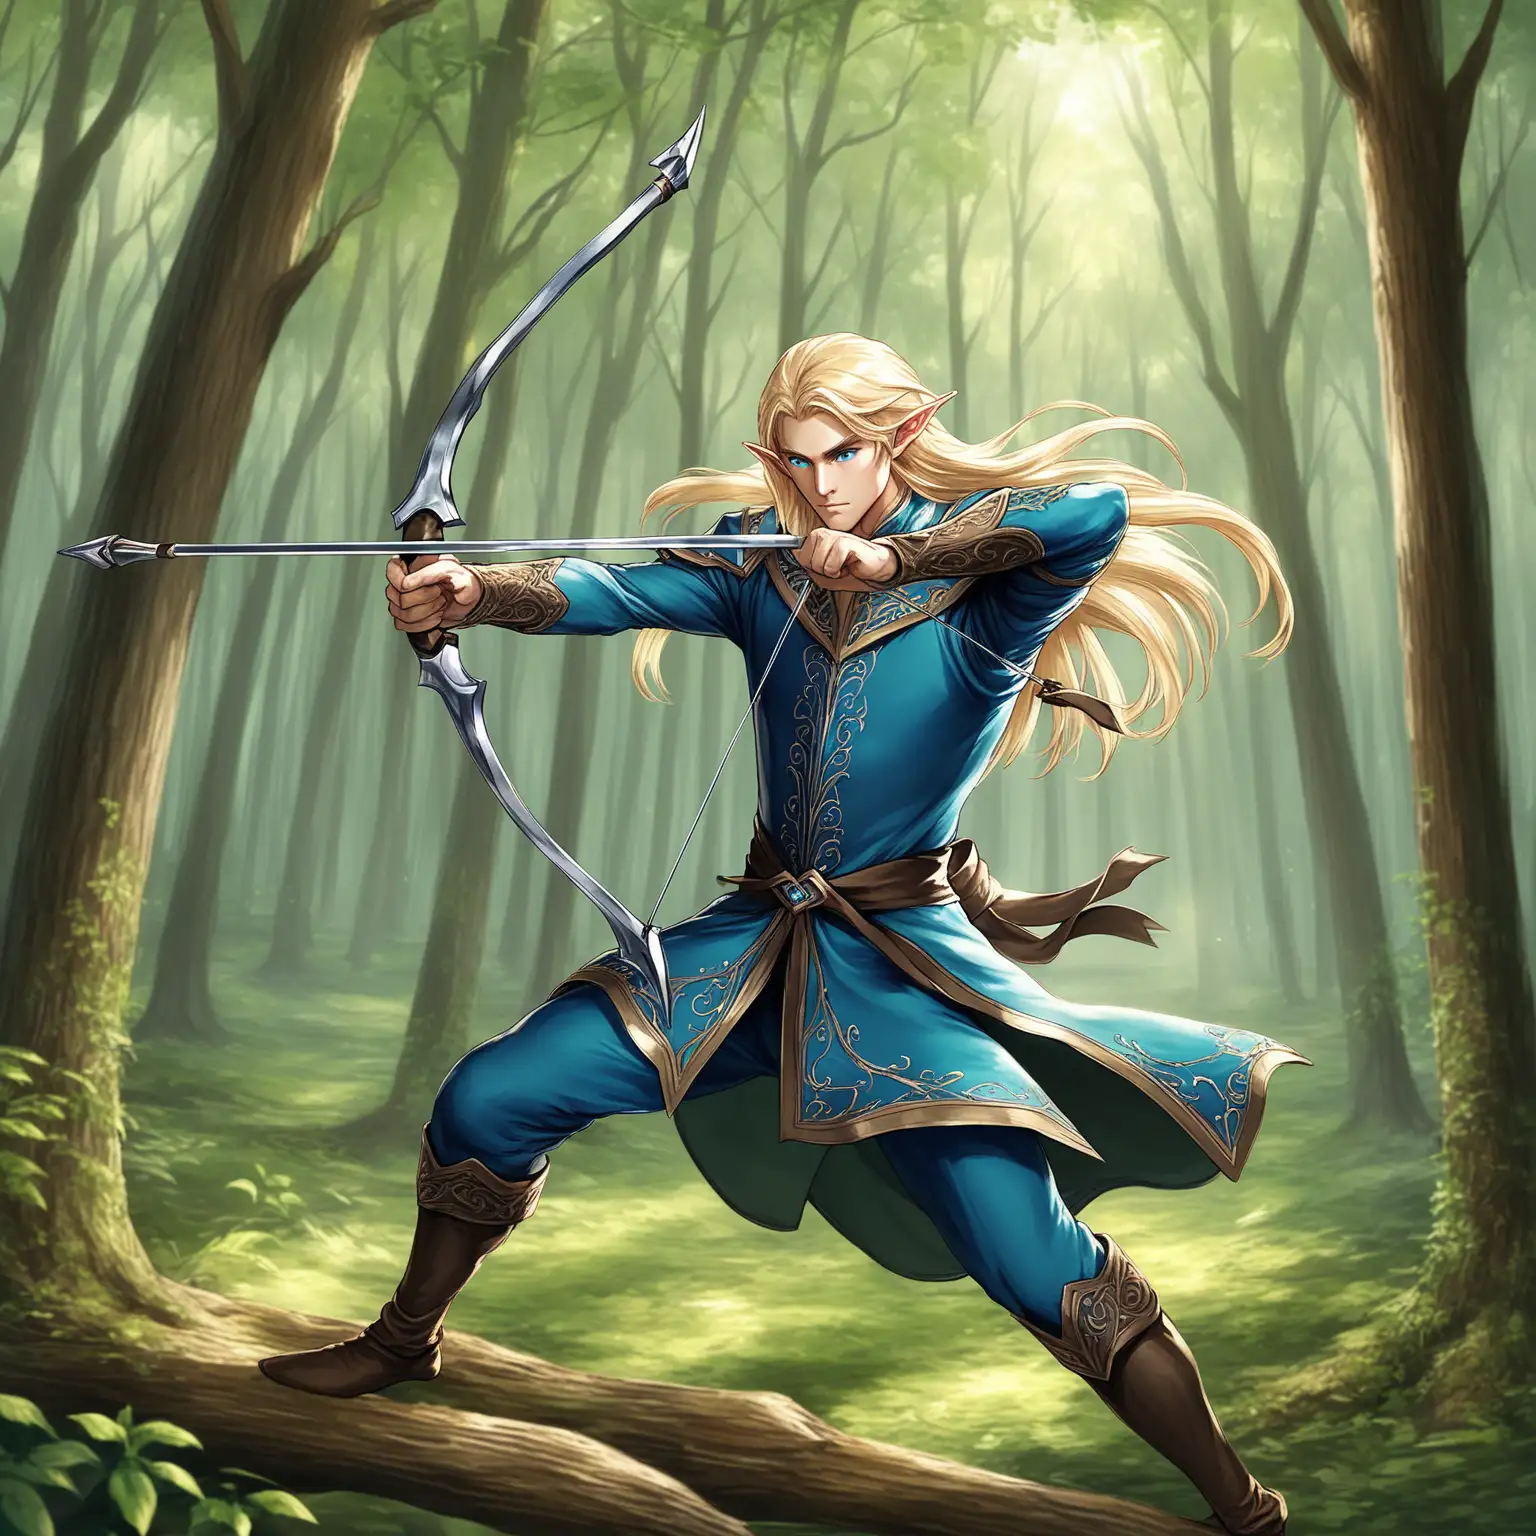 Dynamic Elf Archer with Iron Bow in a Misty Forest